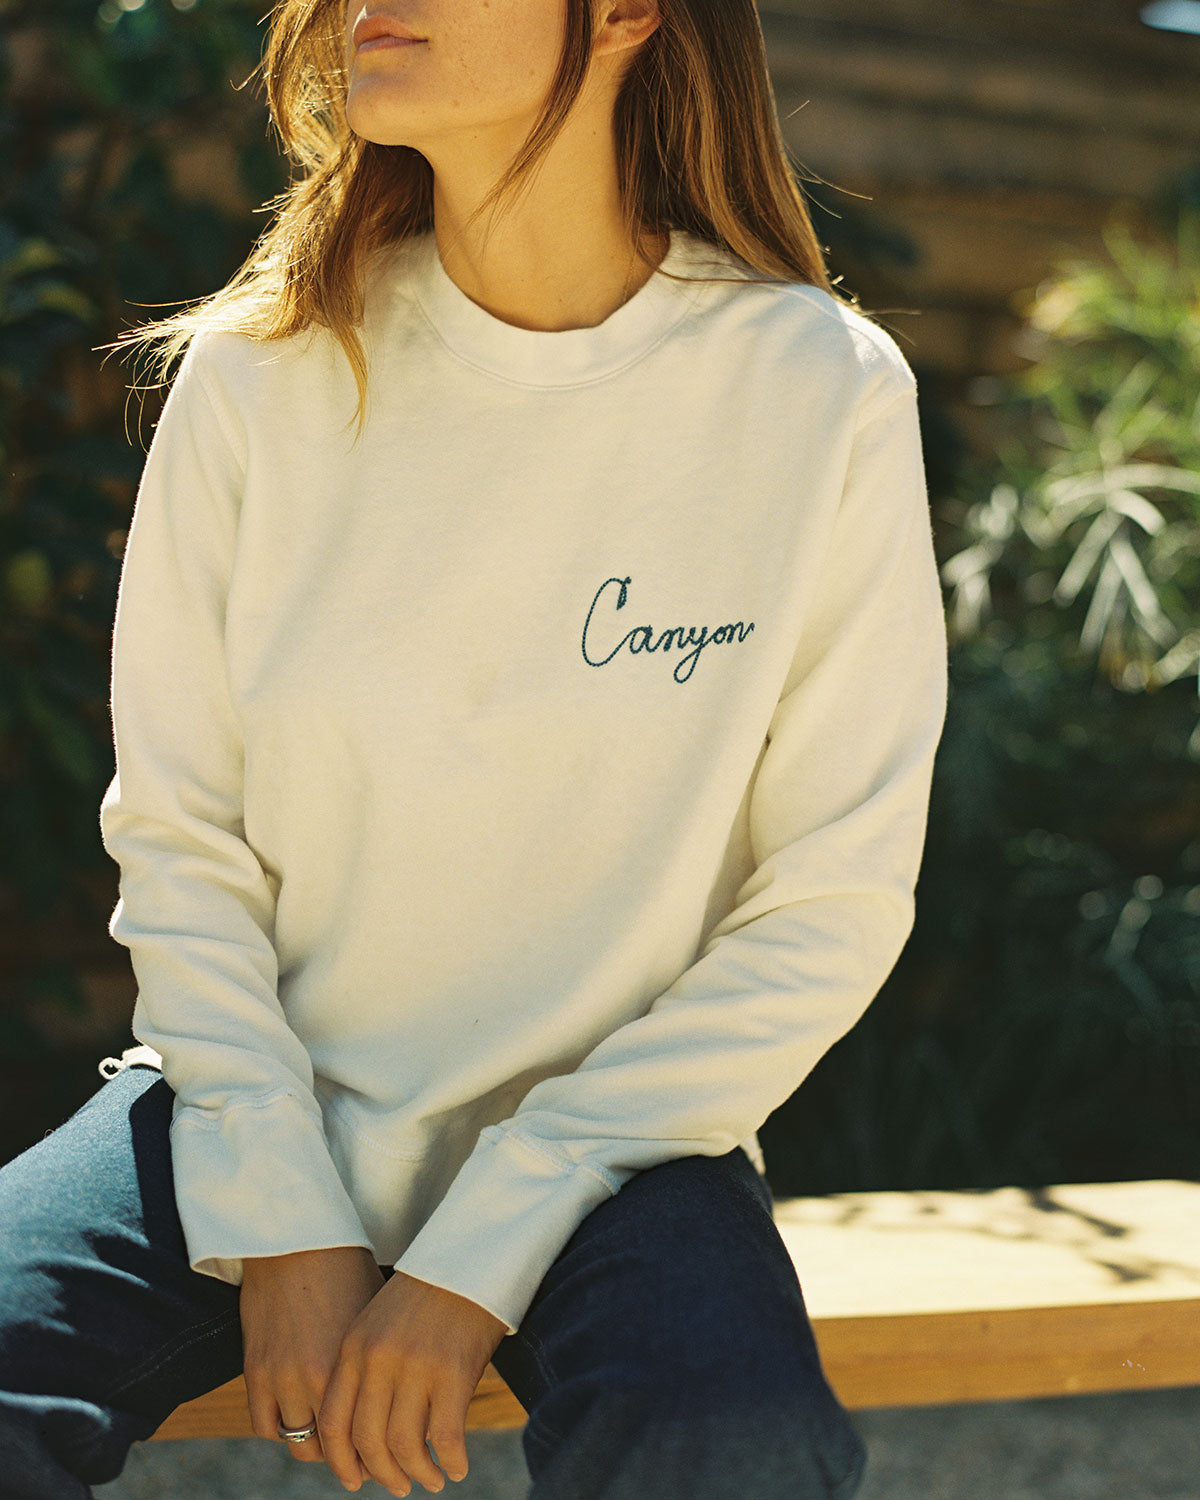 An embroidered sweatshirt by Canyon Coffee